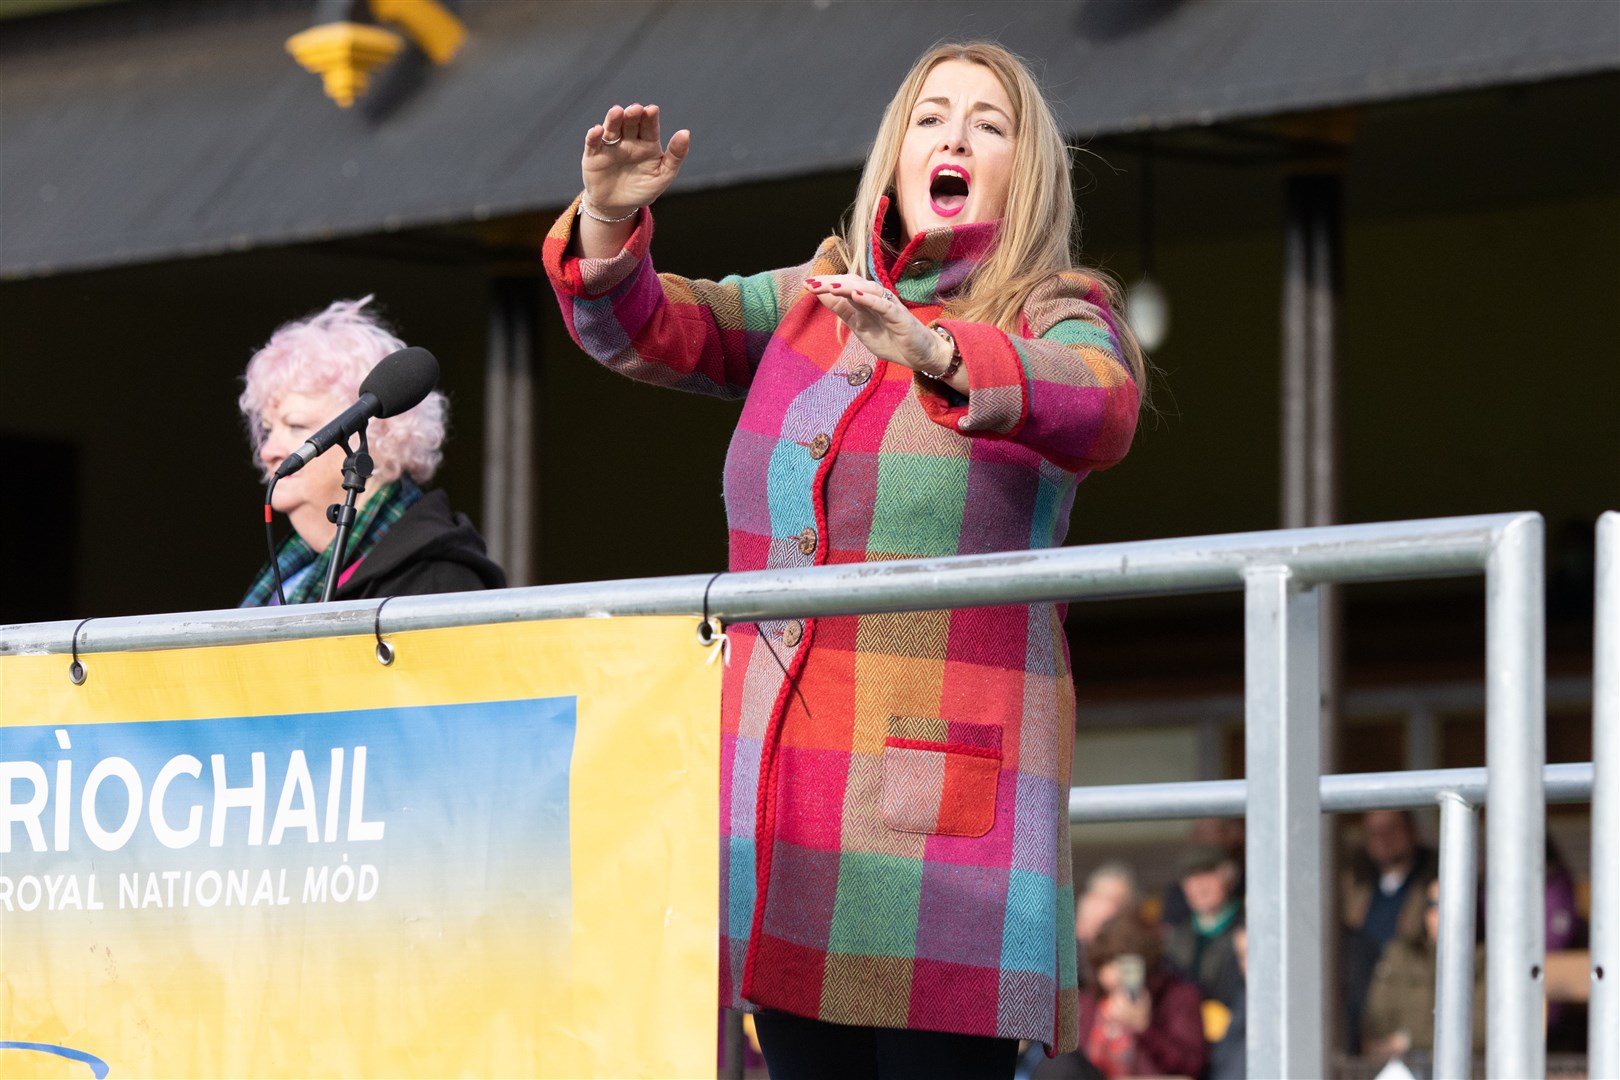 Kirsteen Menzies from the Black Isle Gaelic Choir conducting at the Massed Choirs Event at The Northern Meeting Park in Inverness.